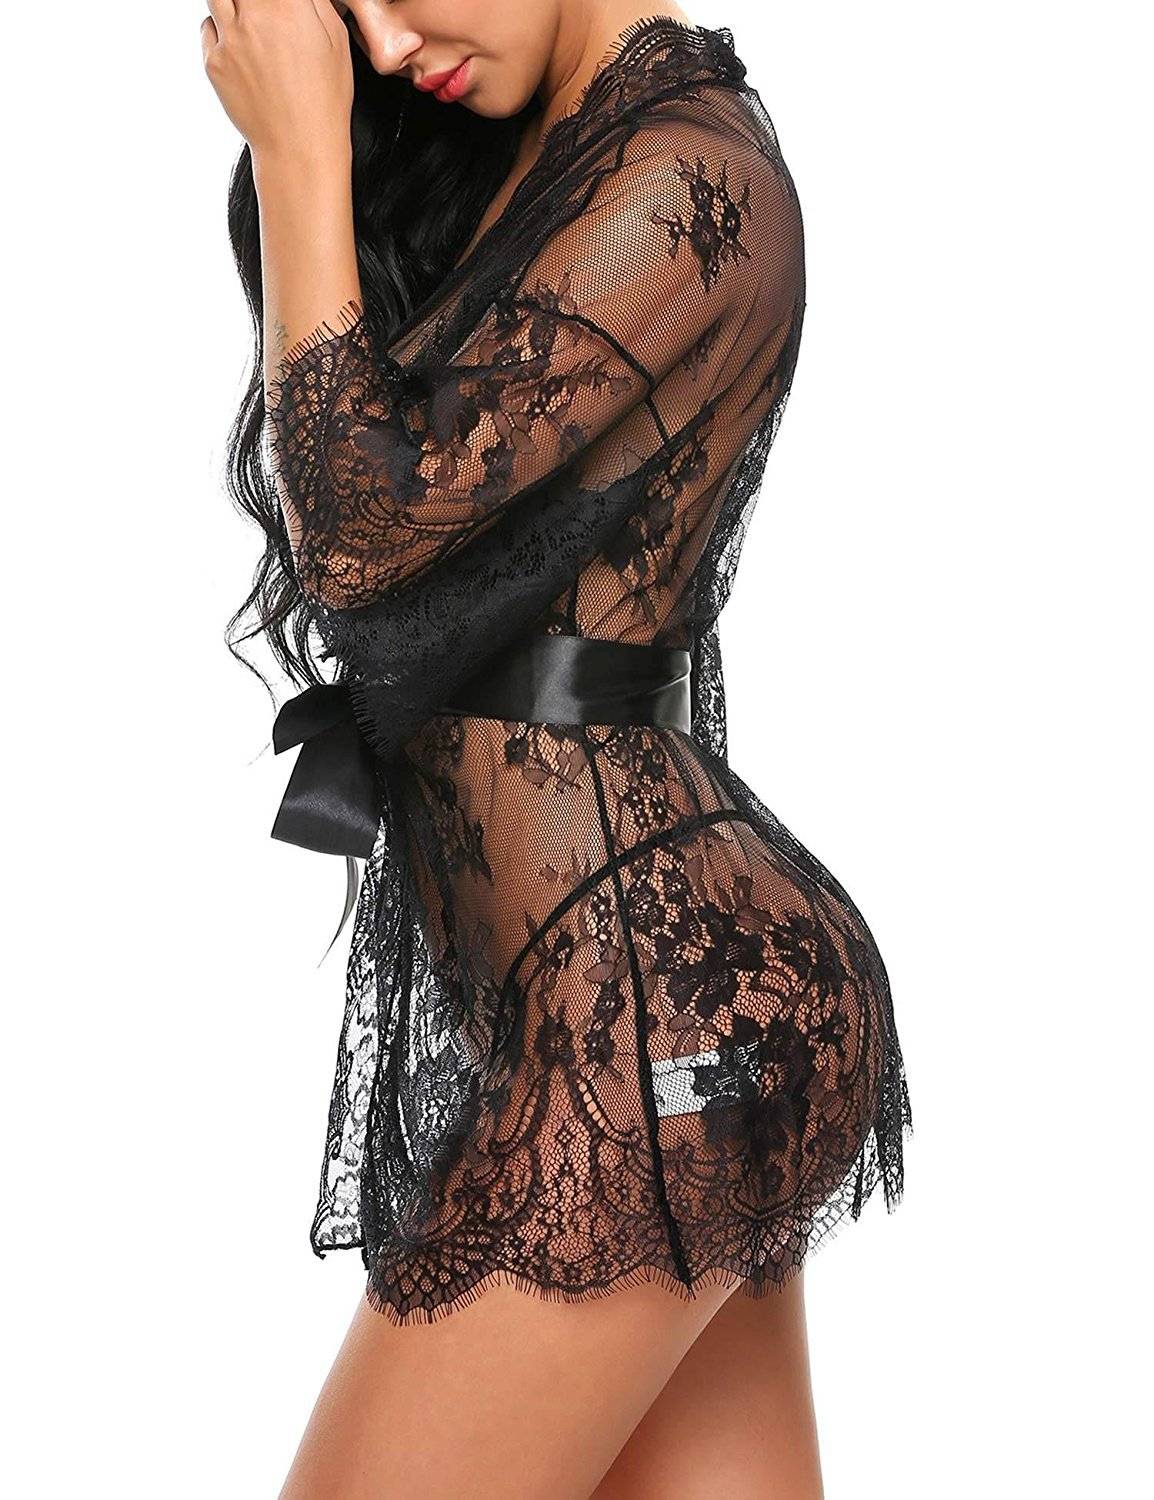 Women's Sexy Mesh Robe and G-Strings Set